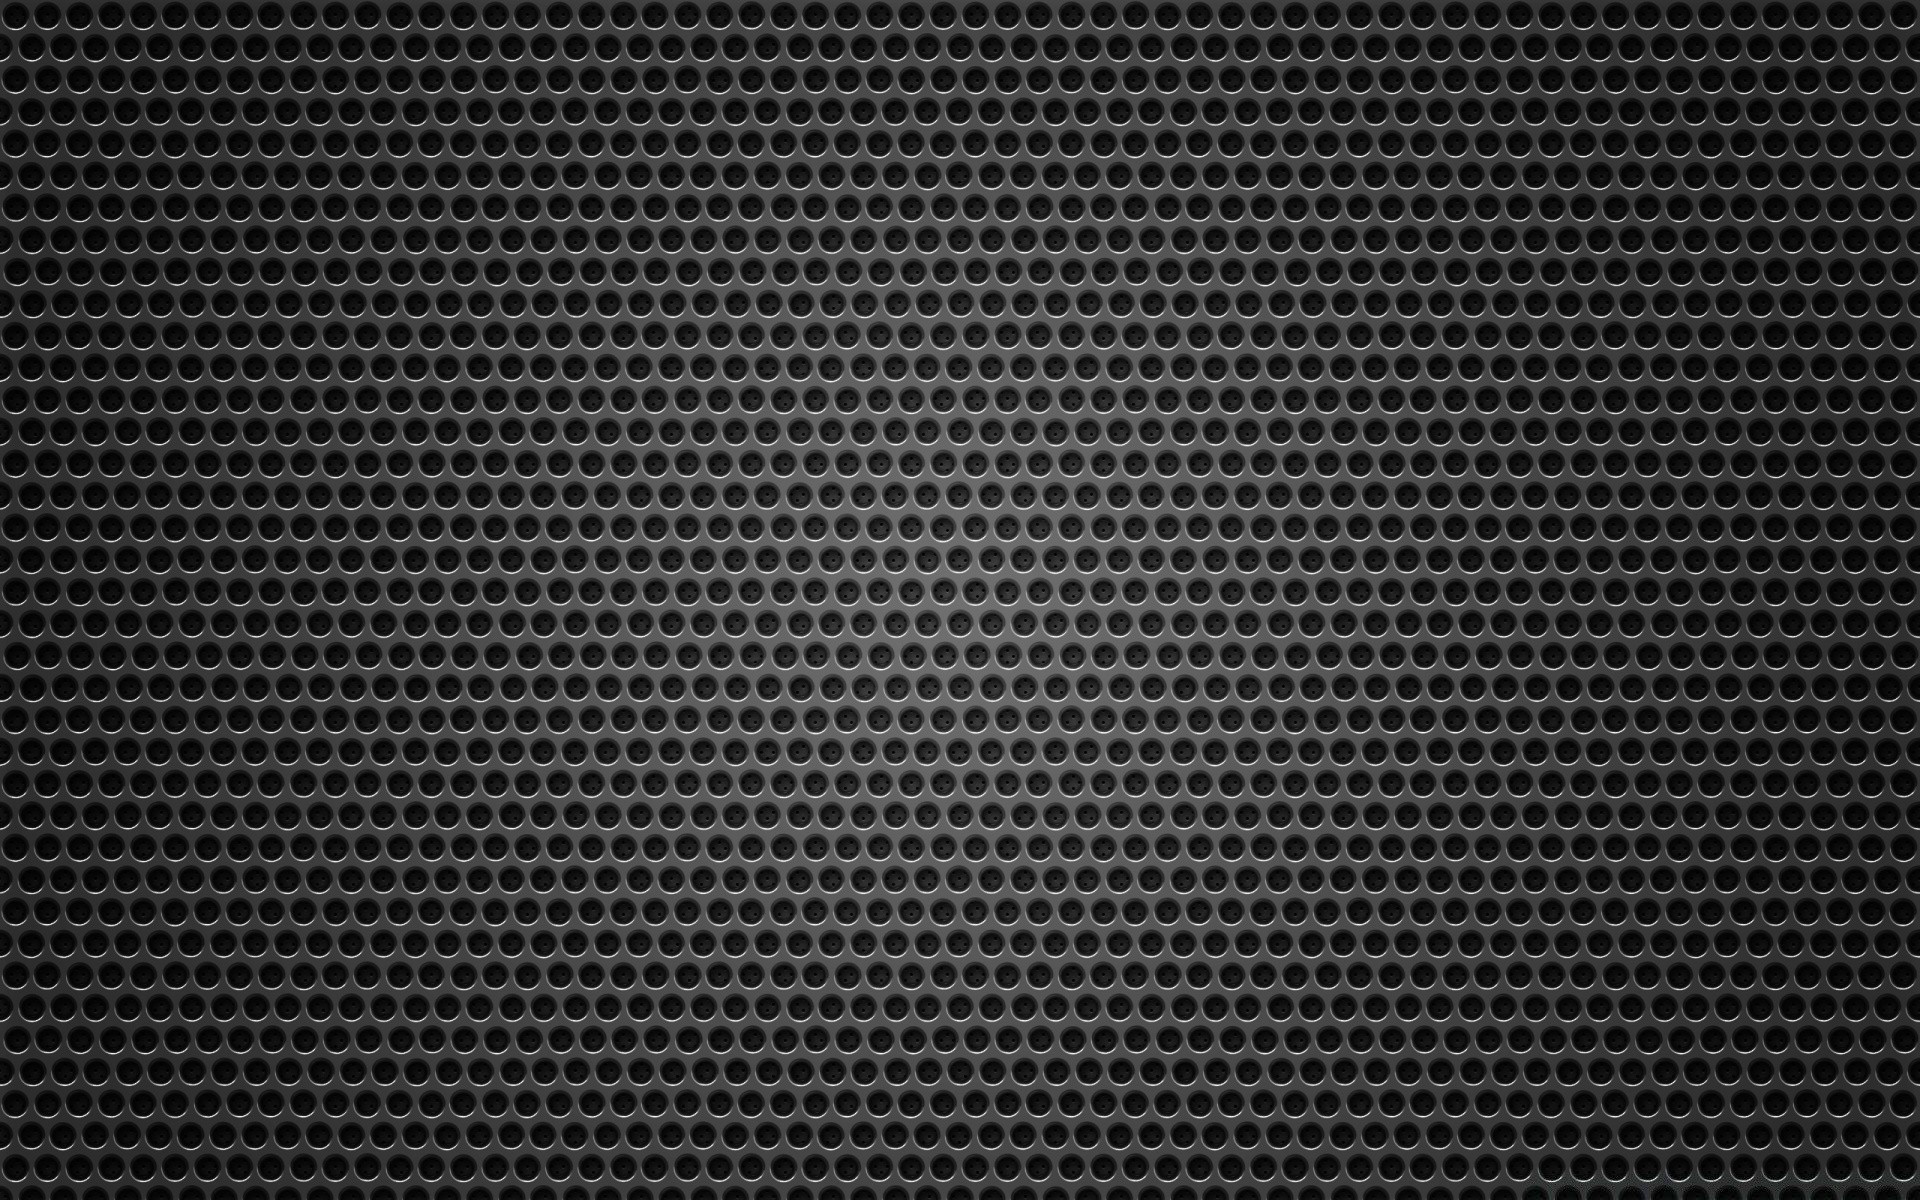 black design wallpaper desktop pattern texture net background fabric abstract seamless weaving luxury surface cover textile iron steel leather retro repetition